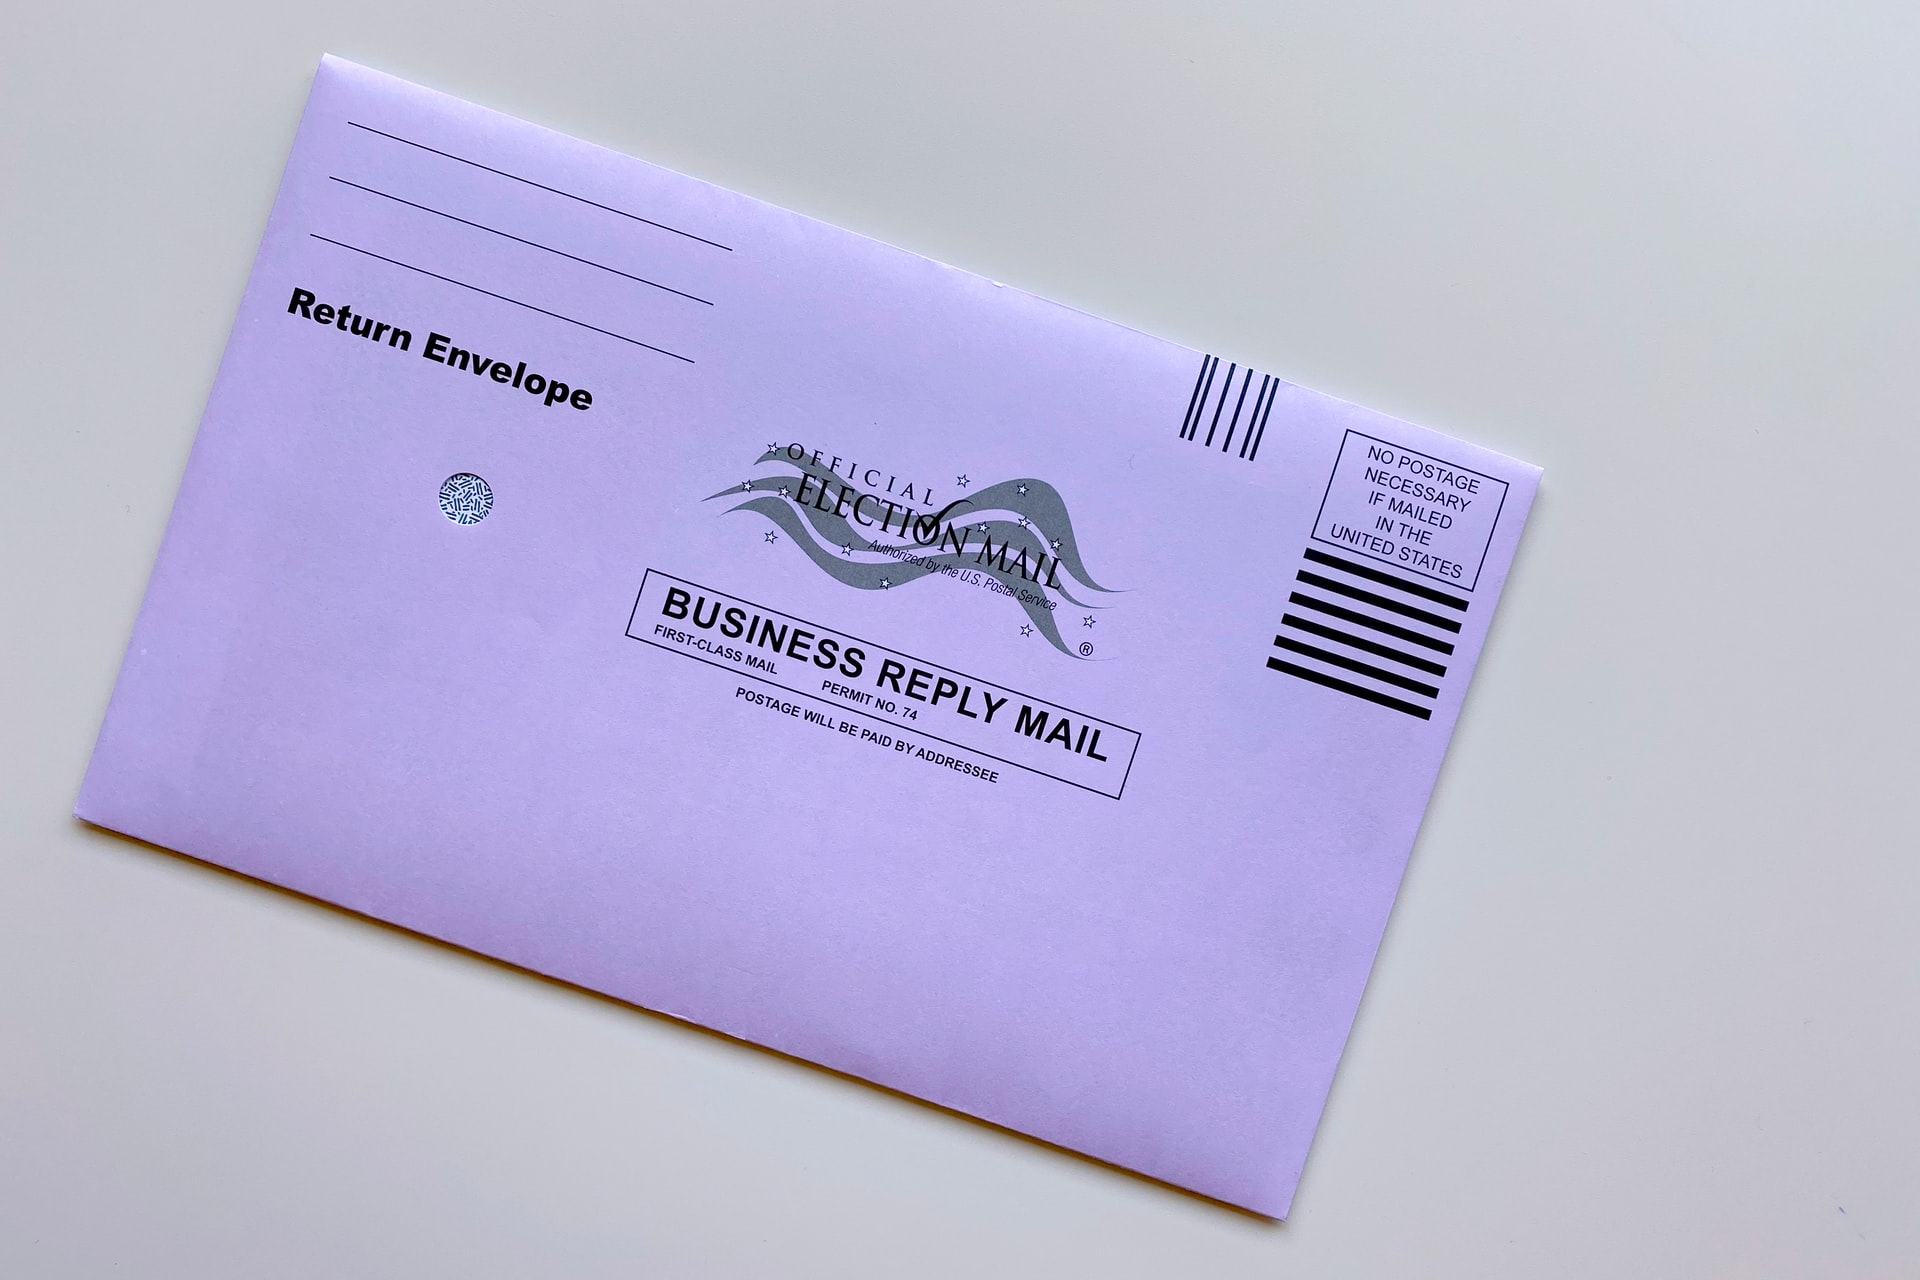 An absentee ballot envelope laying on a white background. 